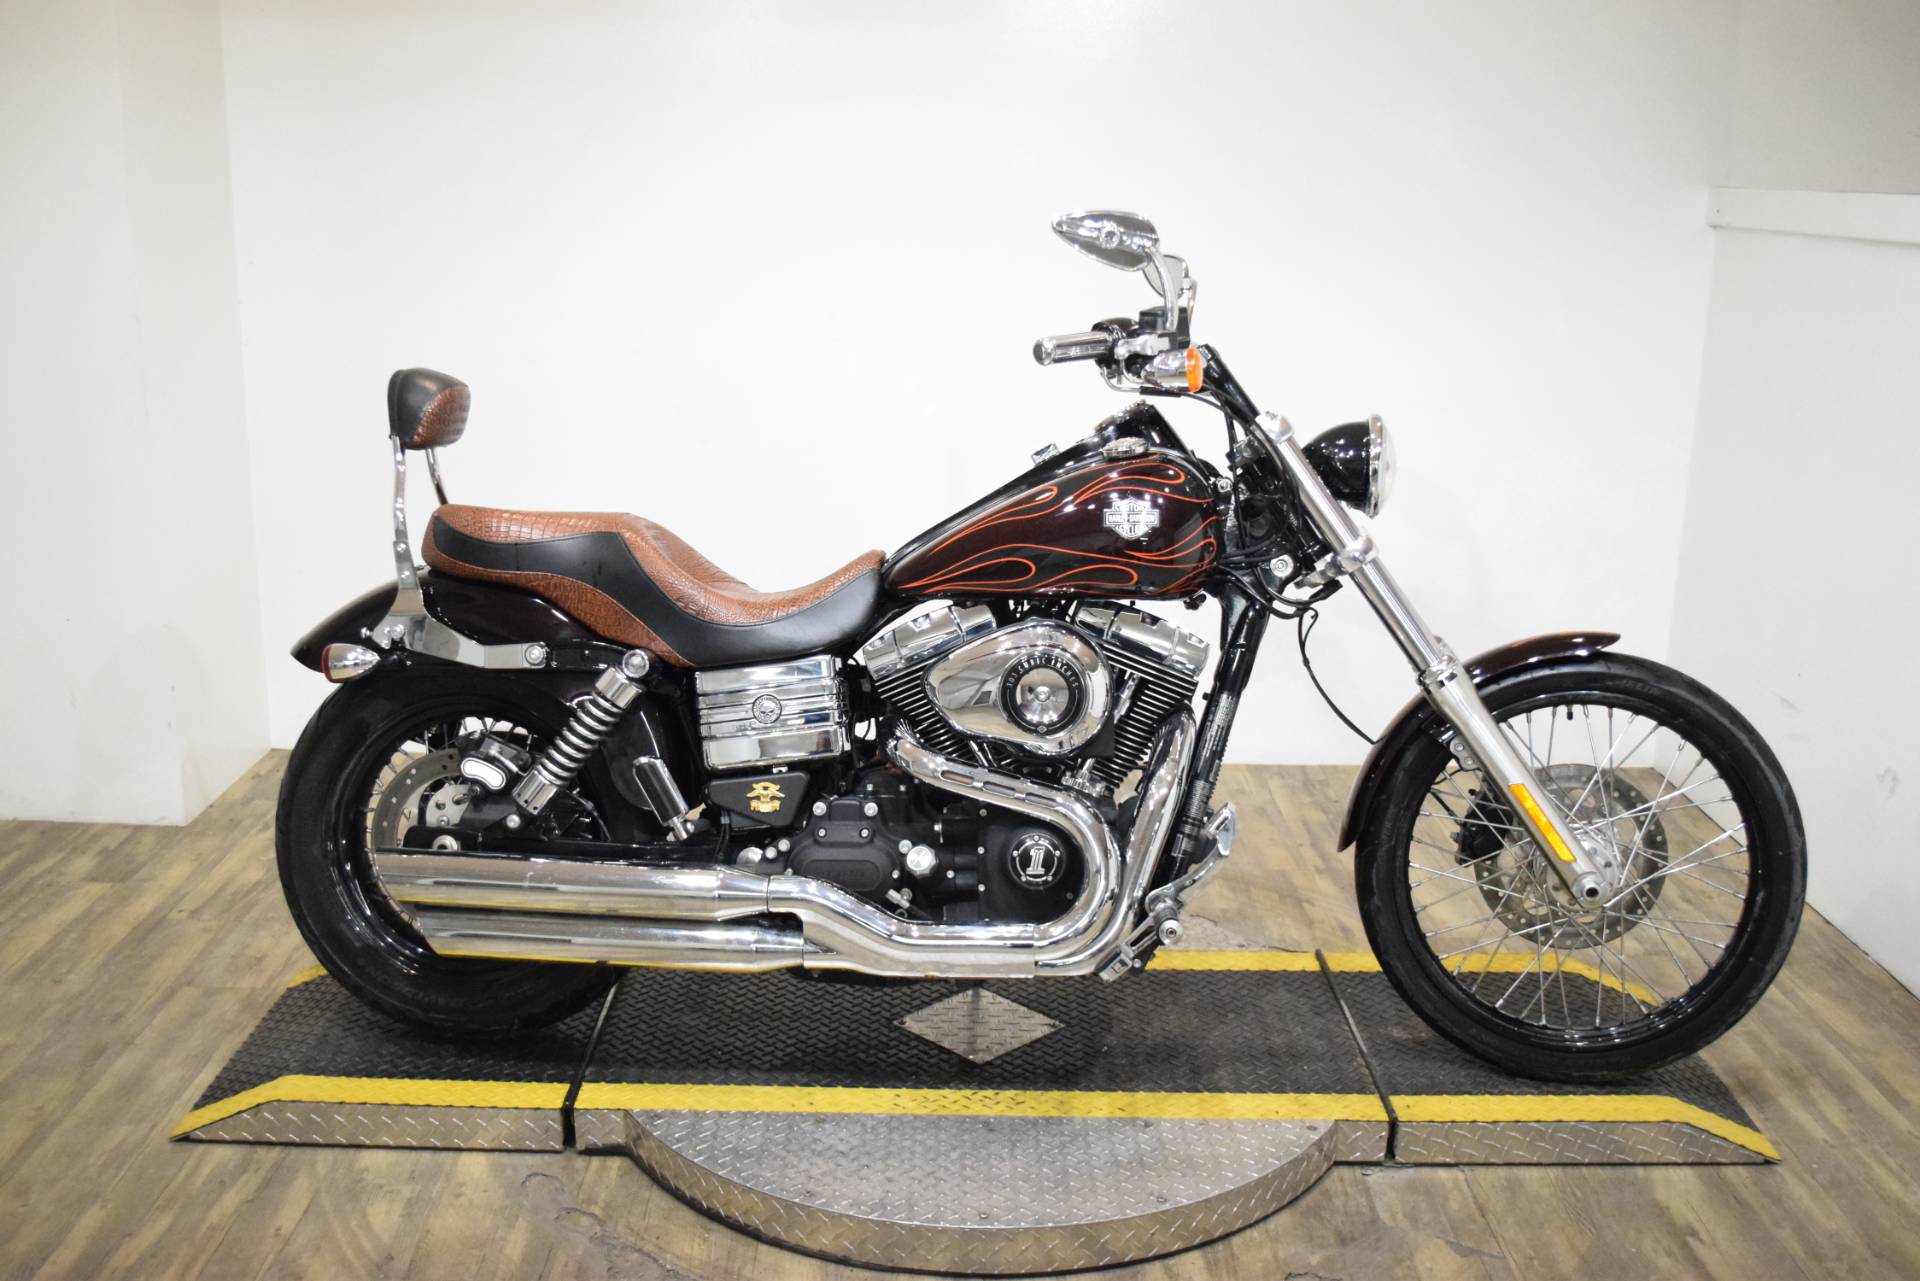 2014 Harley Davidson Dyna Wide Glide Used Motorcycle For Sale Wauconda Illinois